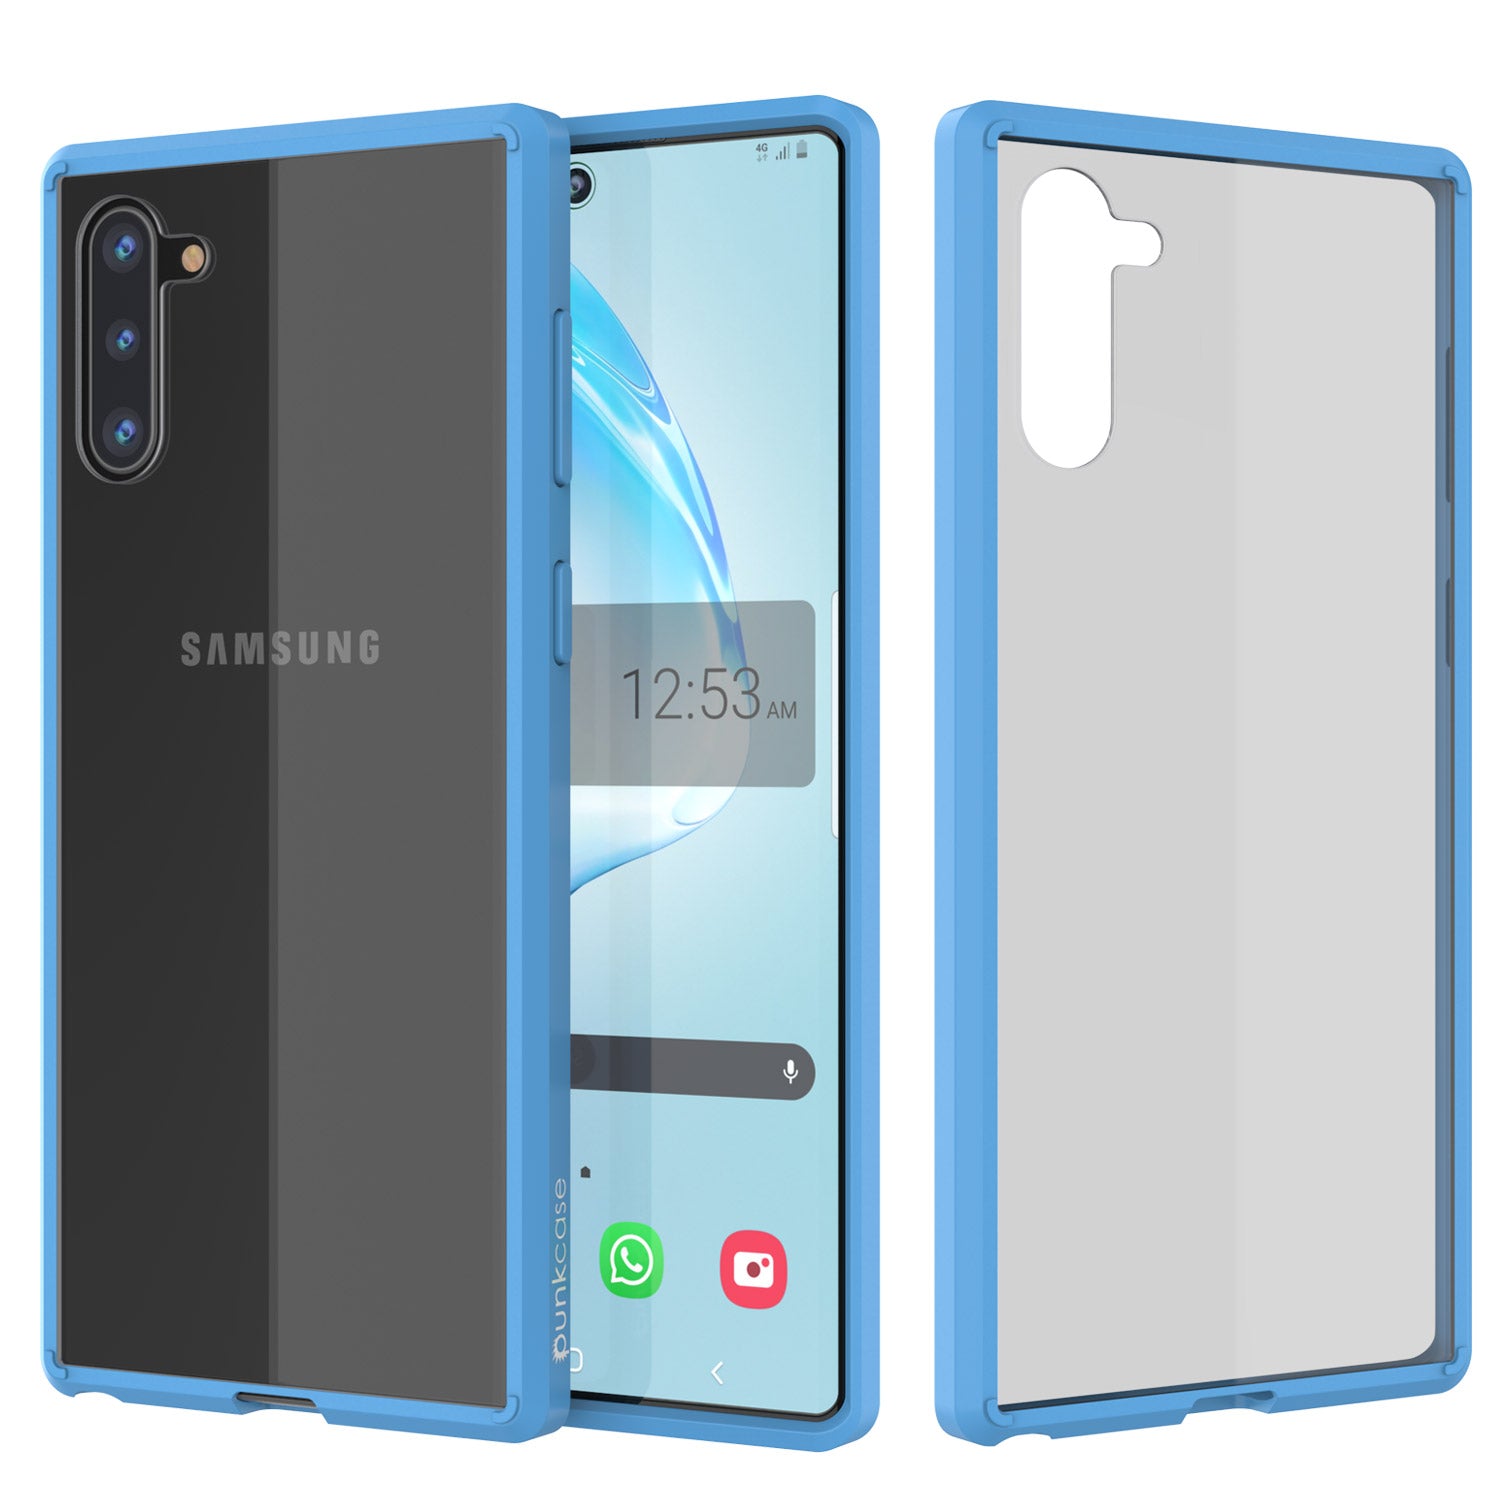 Galaxy Note 10 Punkcase Lucid-2.0 Series Slim Fit Armor Light Blue Case Cover